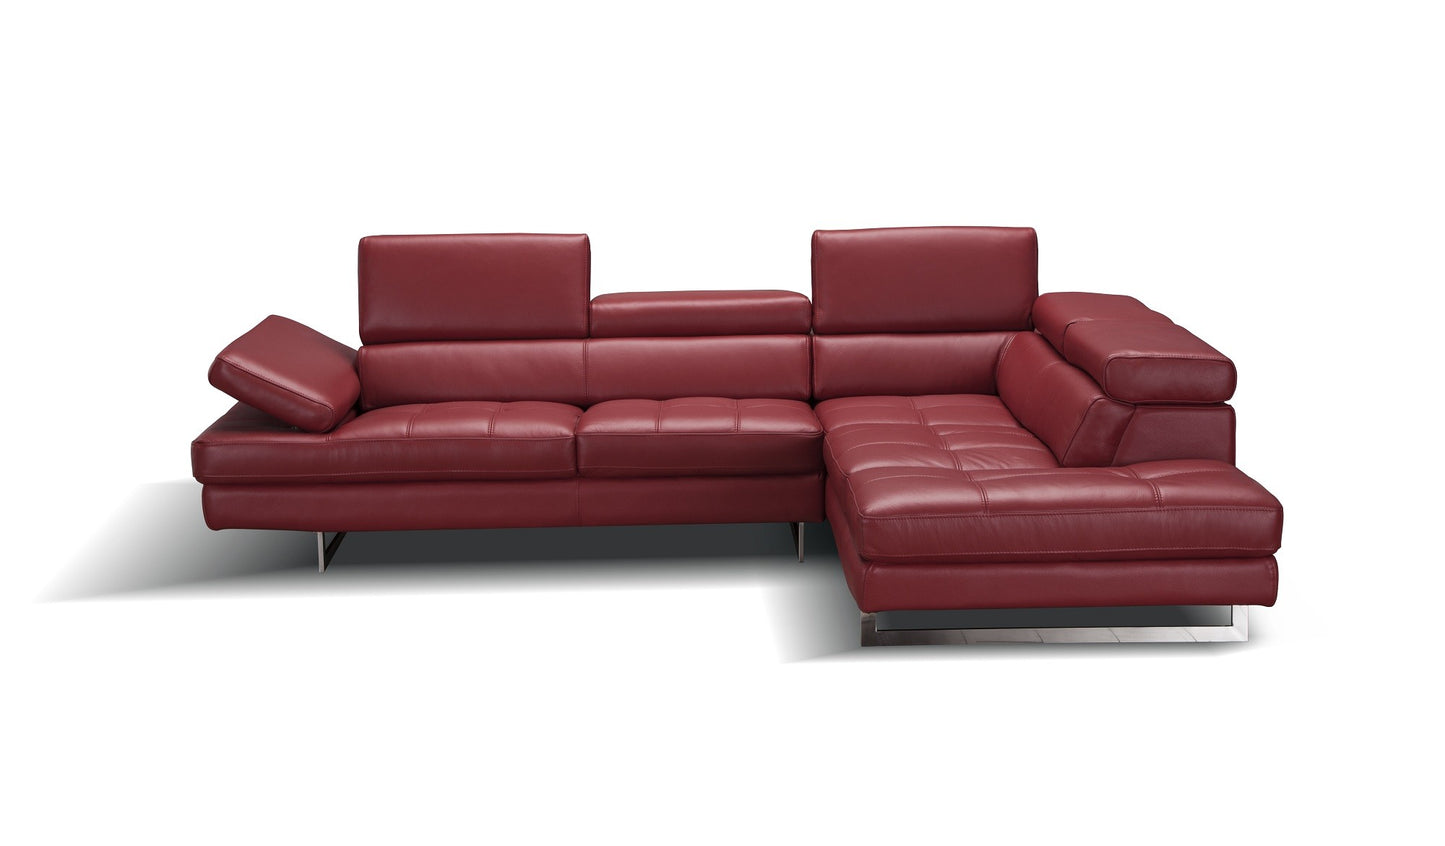 A761 Italian Leather Sectional Sofa Red RHF by JM